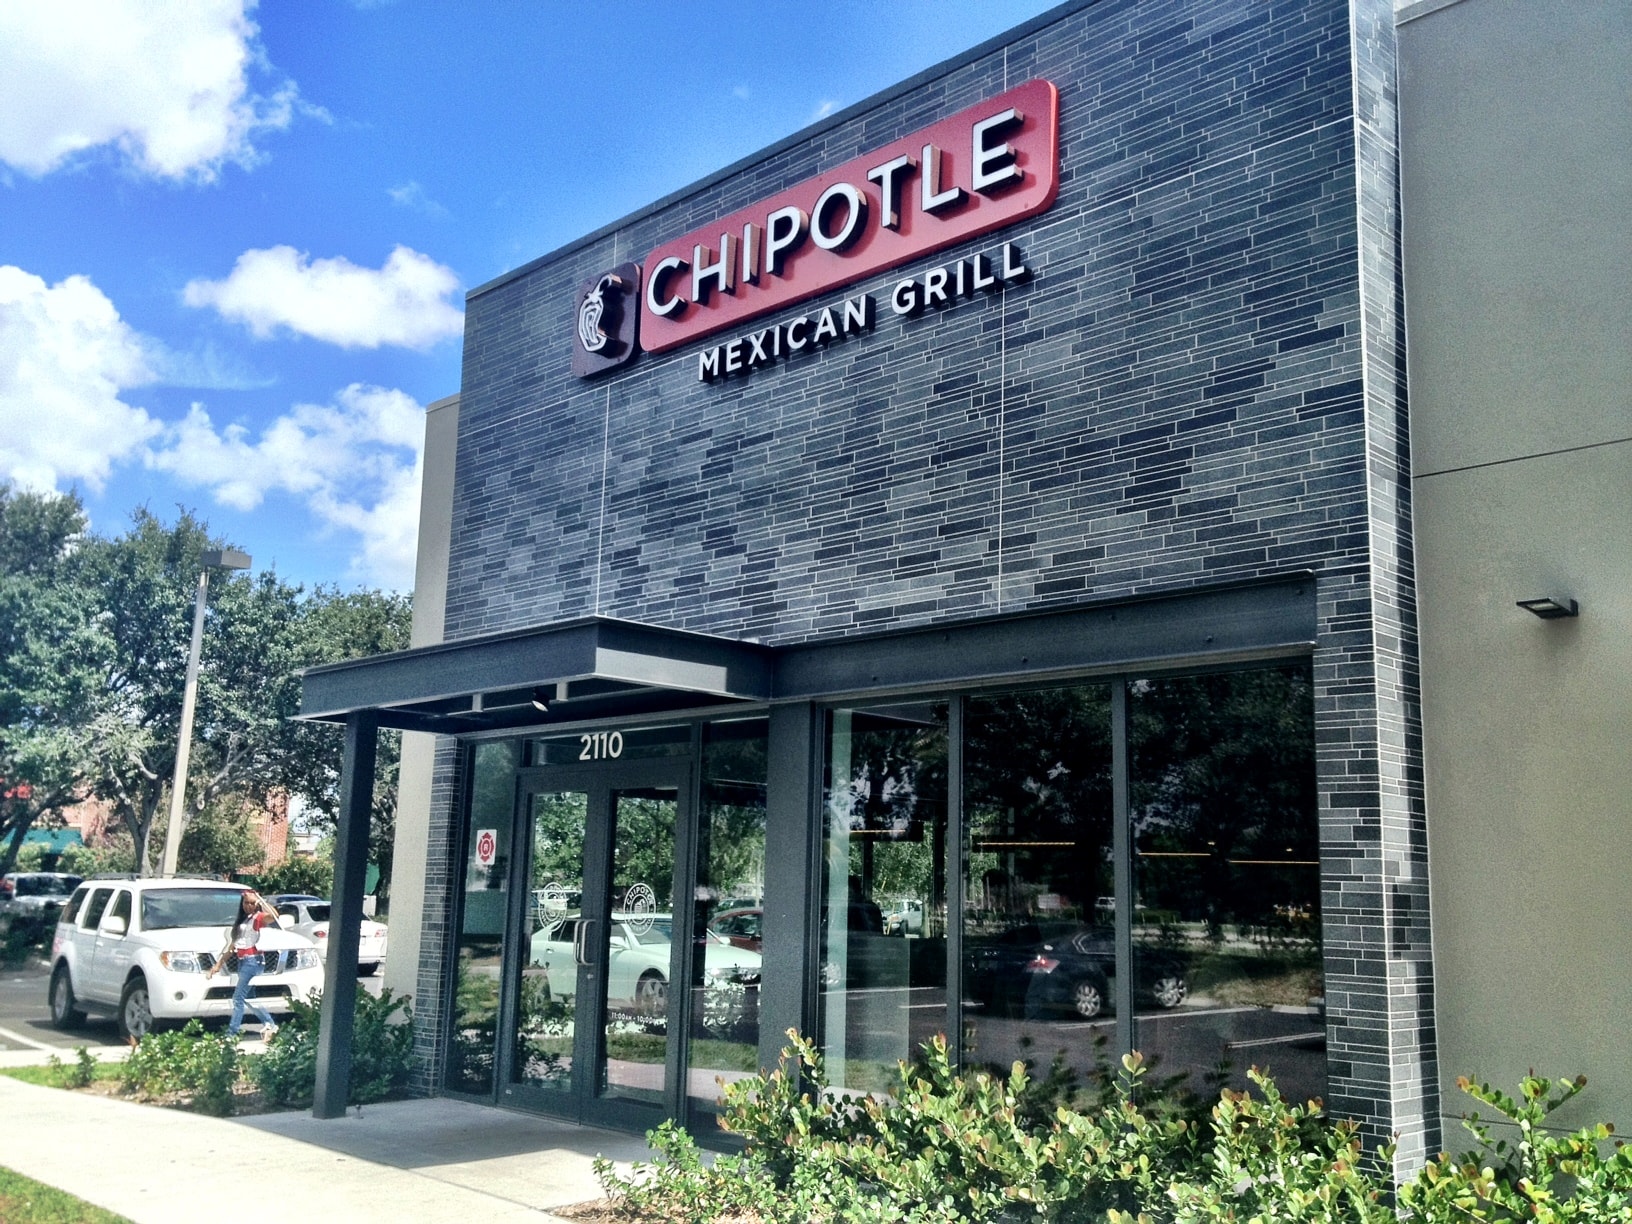 Basalt Mosaic Interlocking Tile adding to industrial look of steel i beam facade at Chipotle in Florida